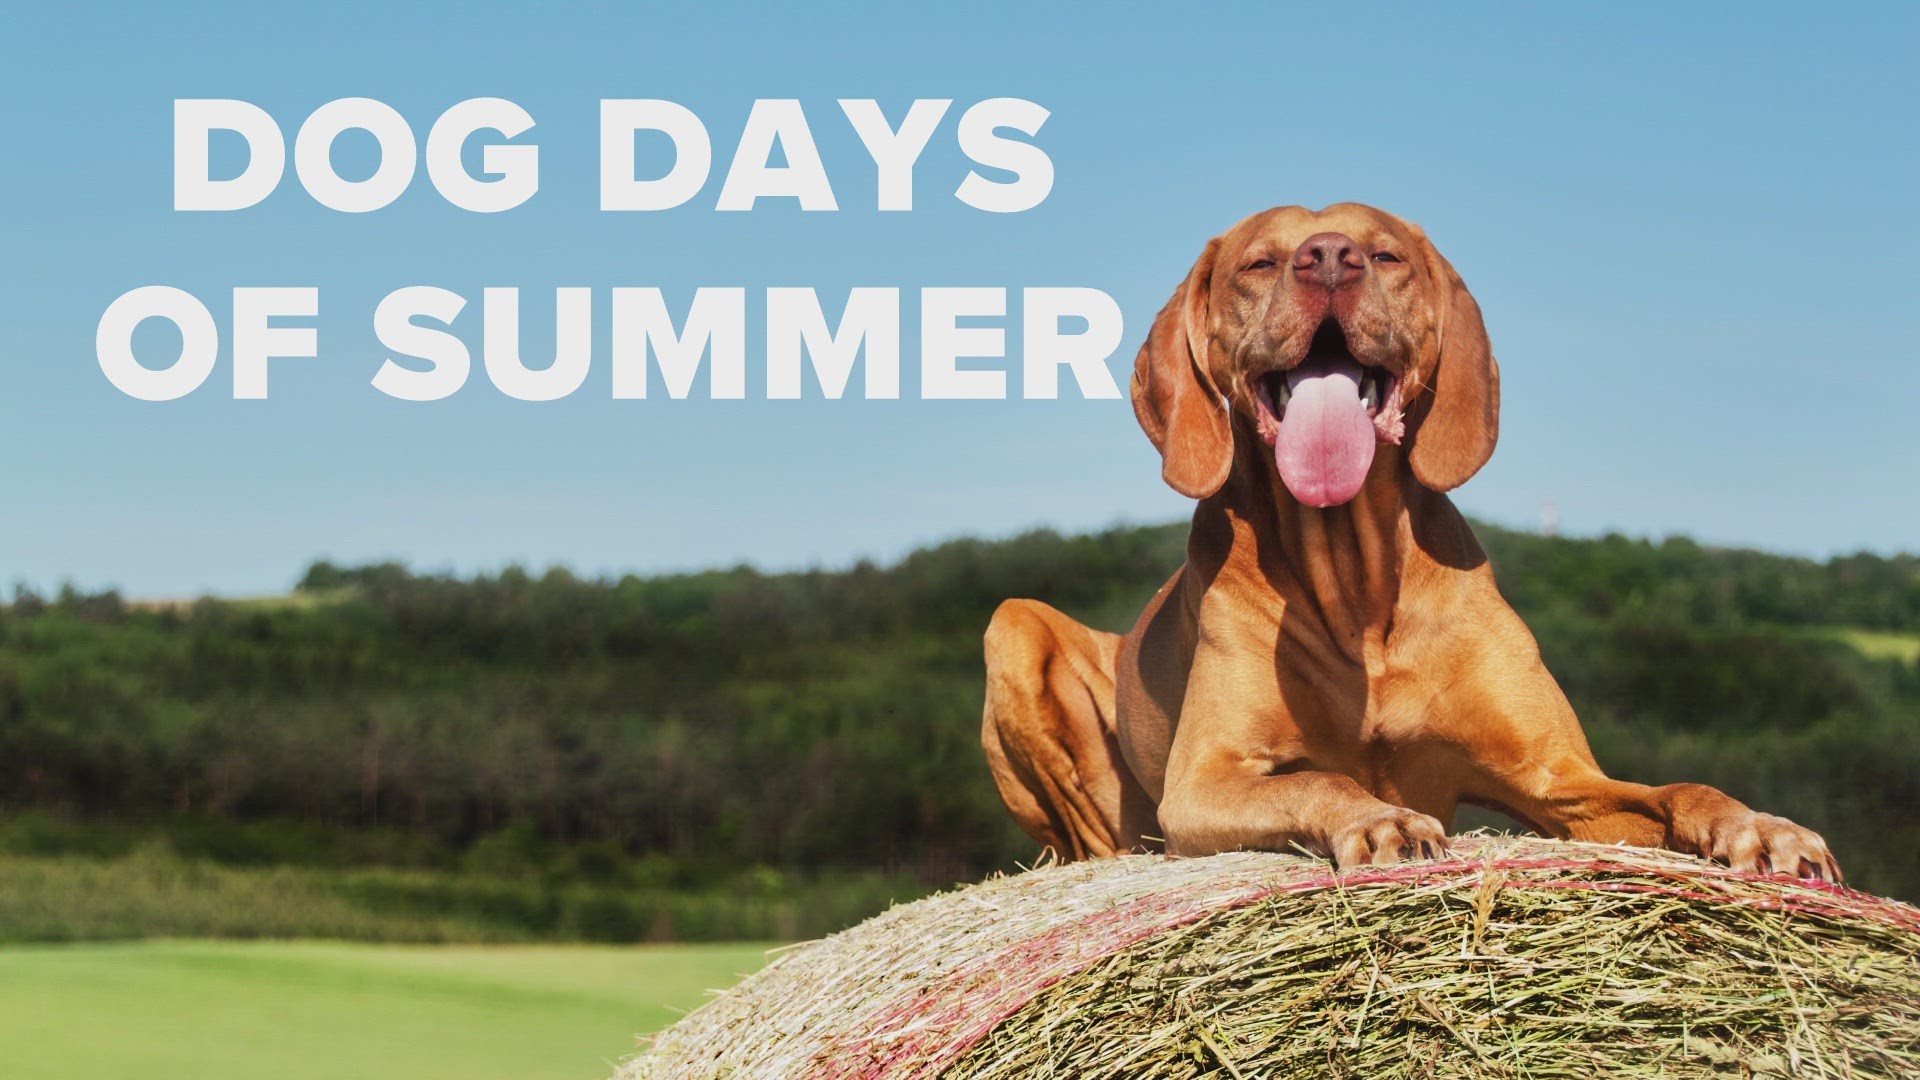 Weather IQ: When and what are the Dog Days of Summer?